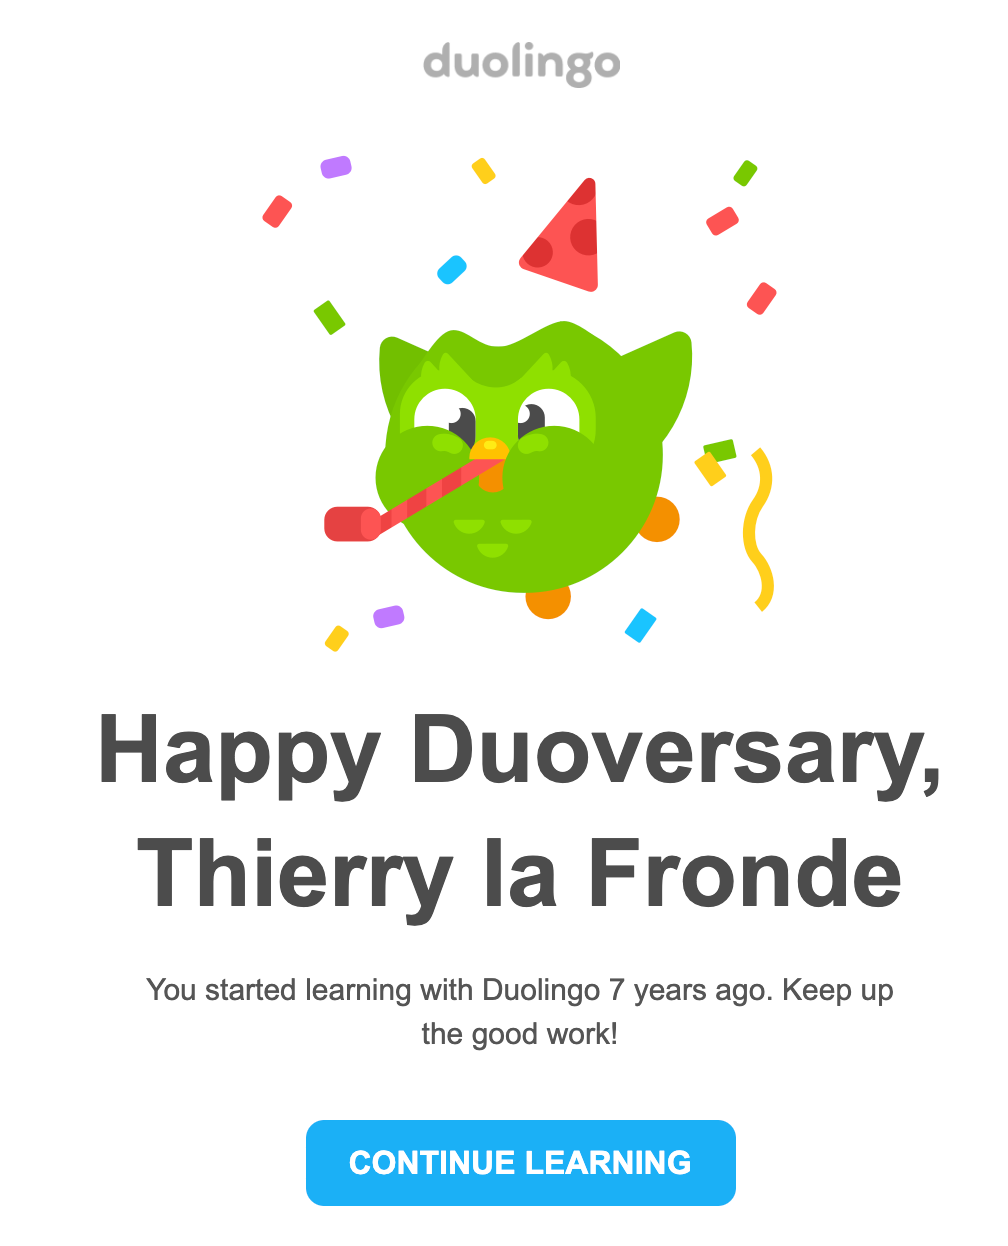 Screenshot of the app’s mascot, Duo, wishing a happy anniversary after 7 years of using the app: “Happy Duoversary, Thierry la Fronde”